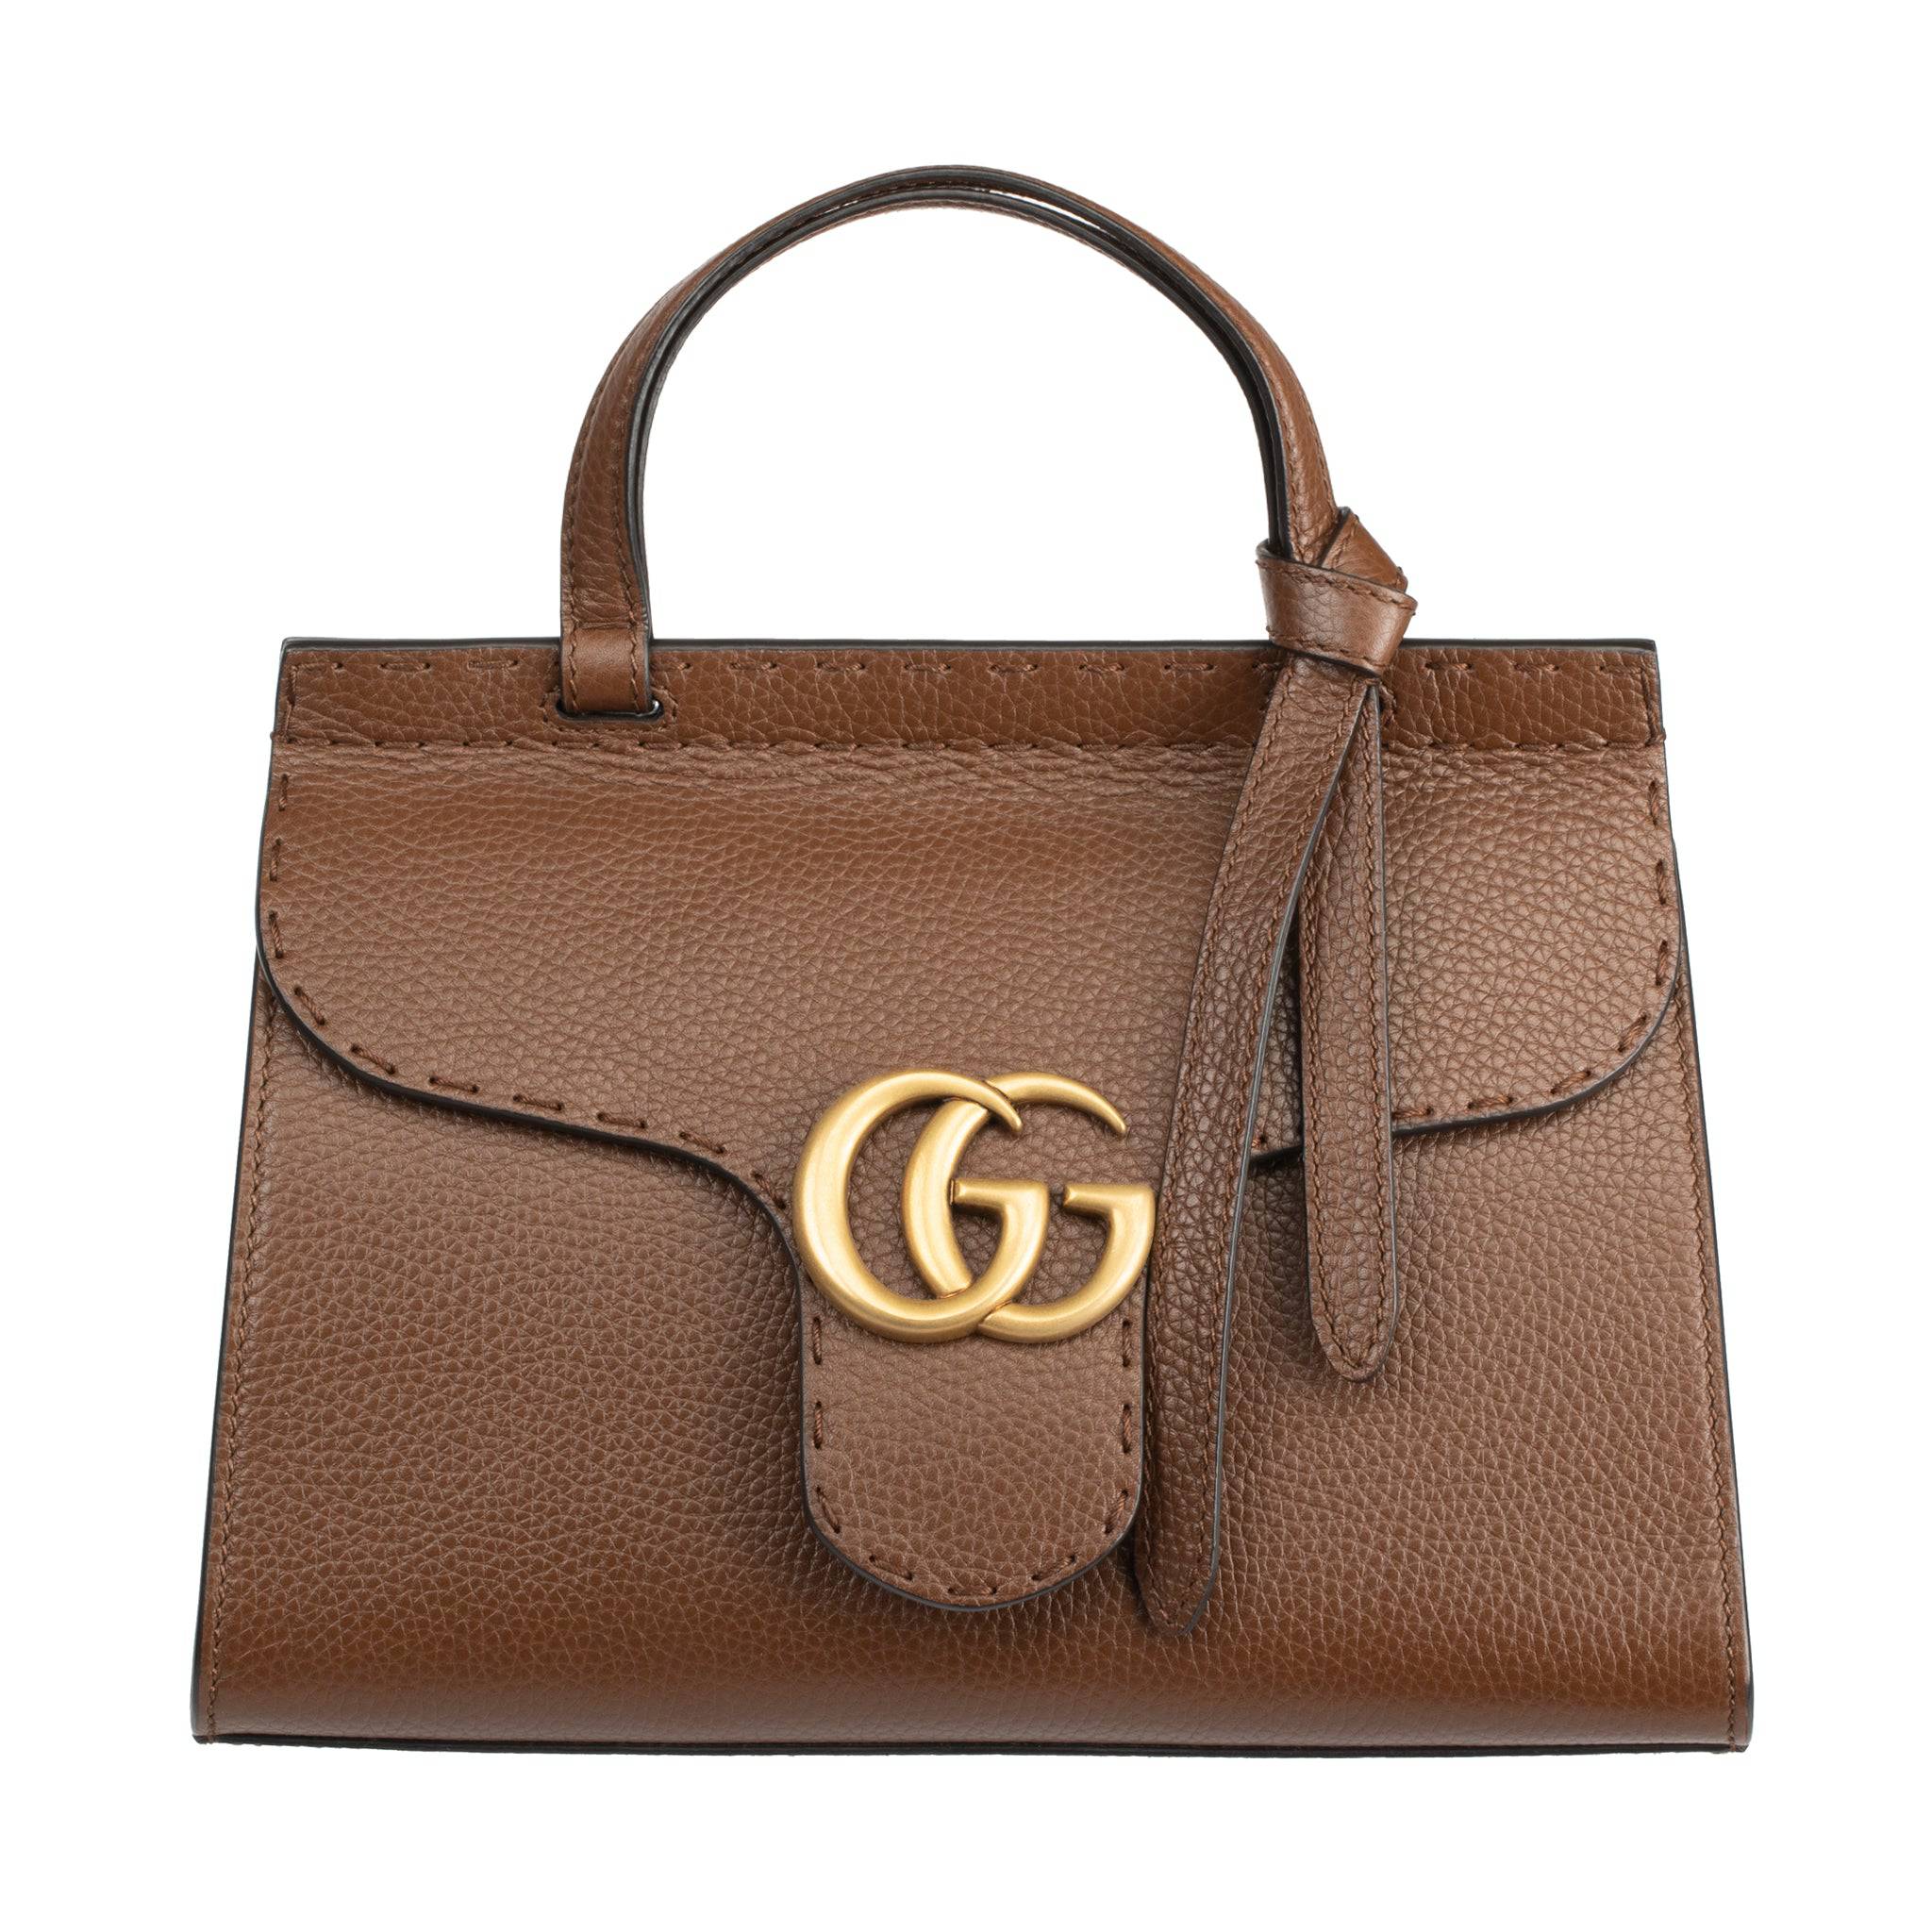 GUCCI MARMONT TOTE WITH TOP HANDLE BROWN AGED GOLD HARDWARE - On Repeat